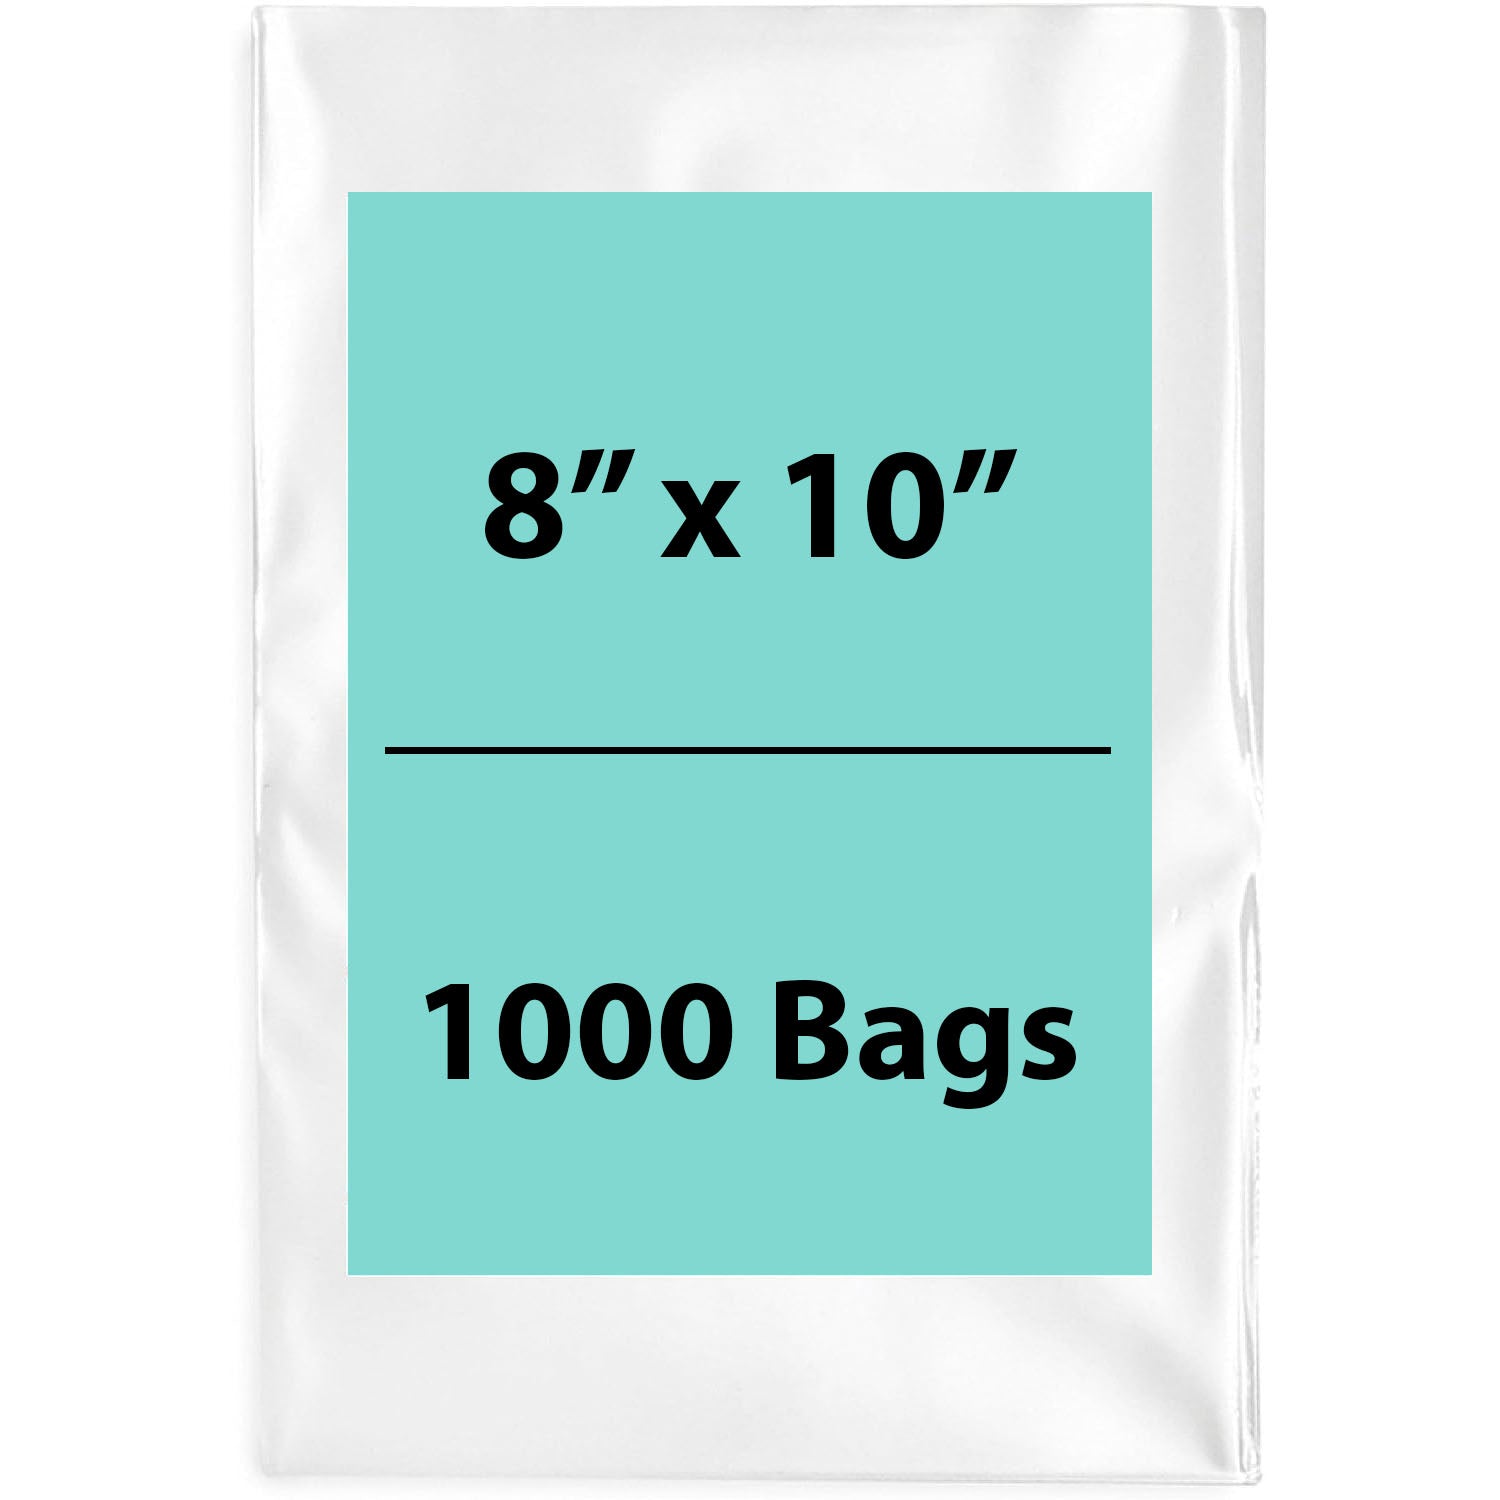 Clear Poly Bags 3Mil 8X10 Flat Open Top (LDPE)